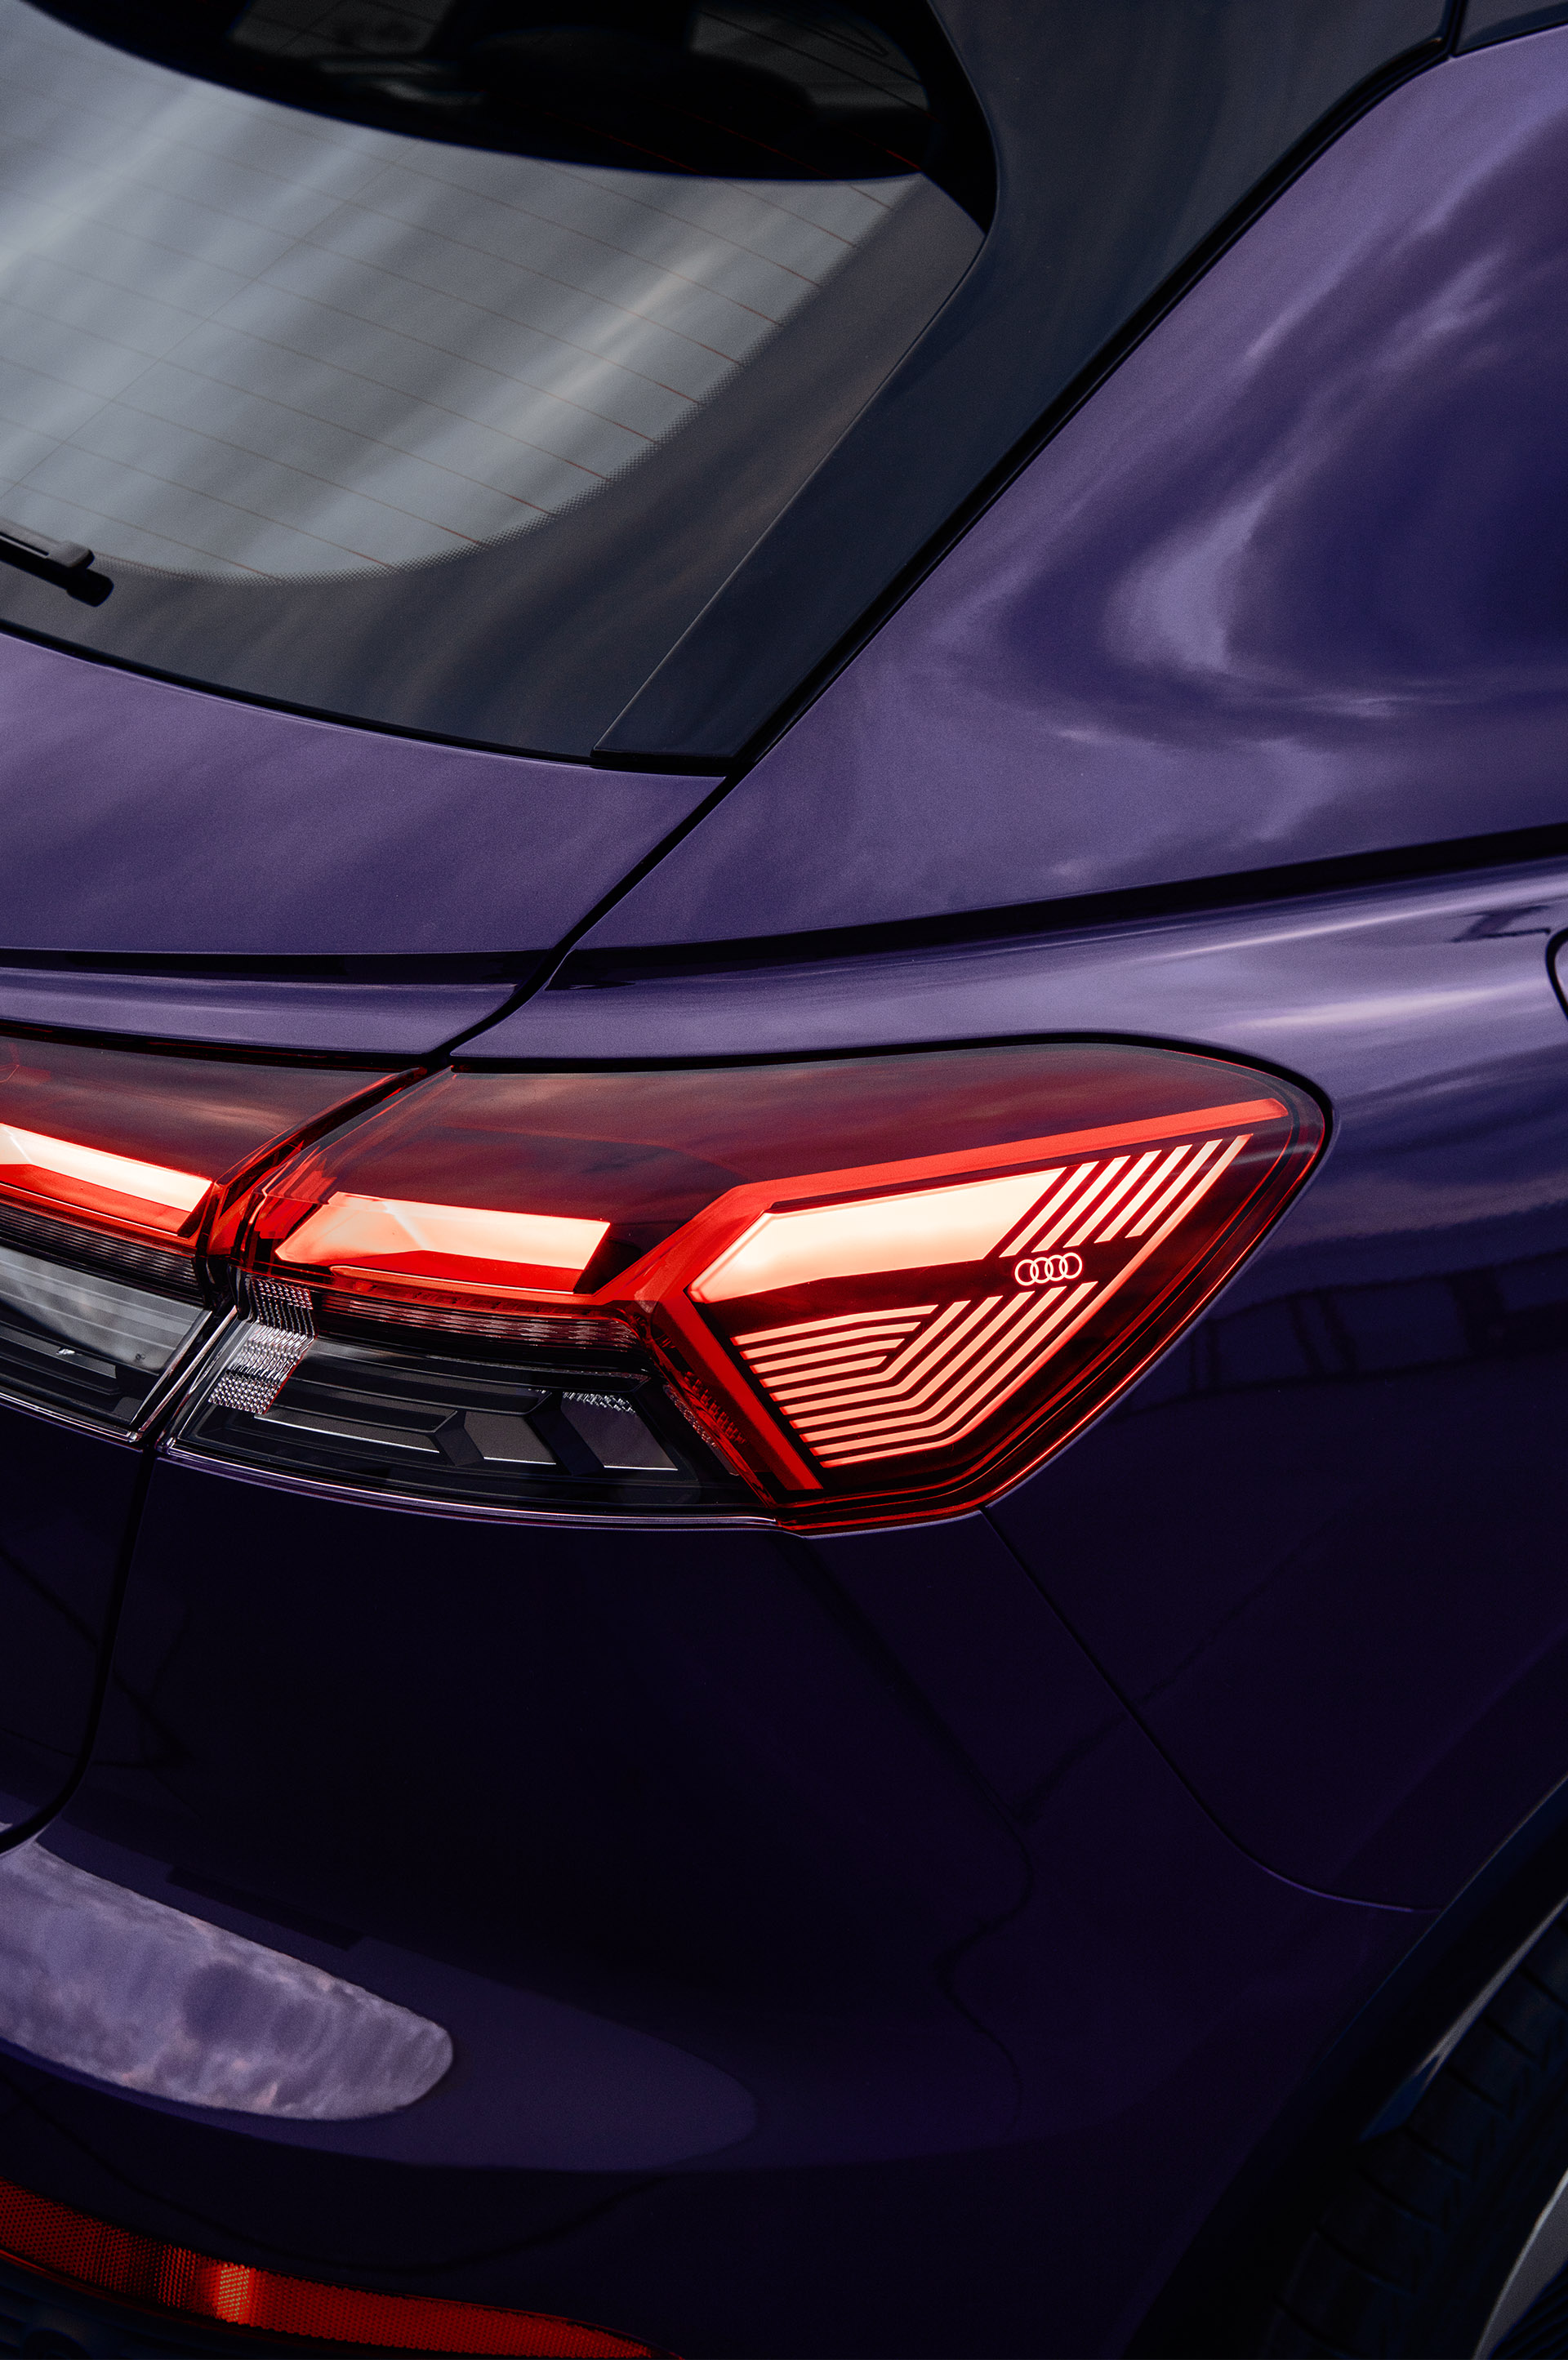 Taillights and body parts in detail.